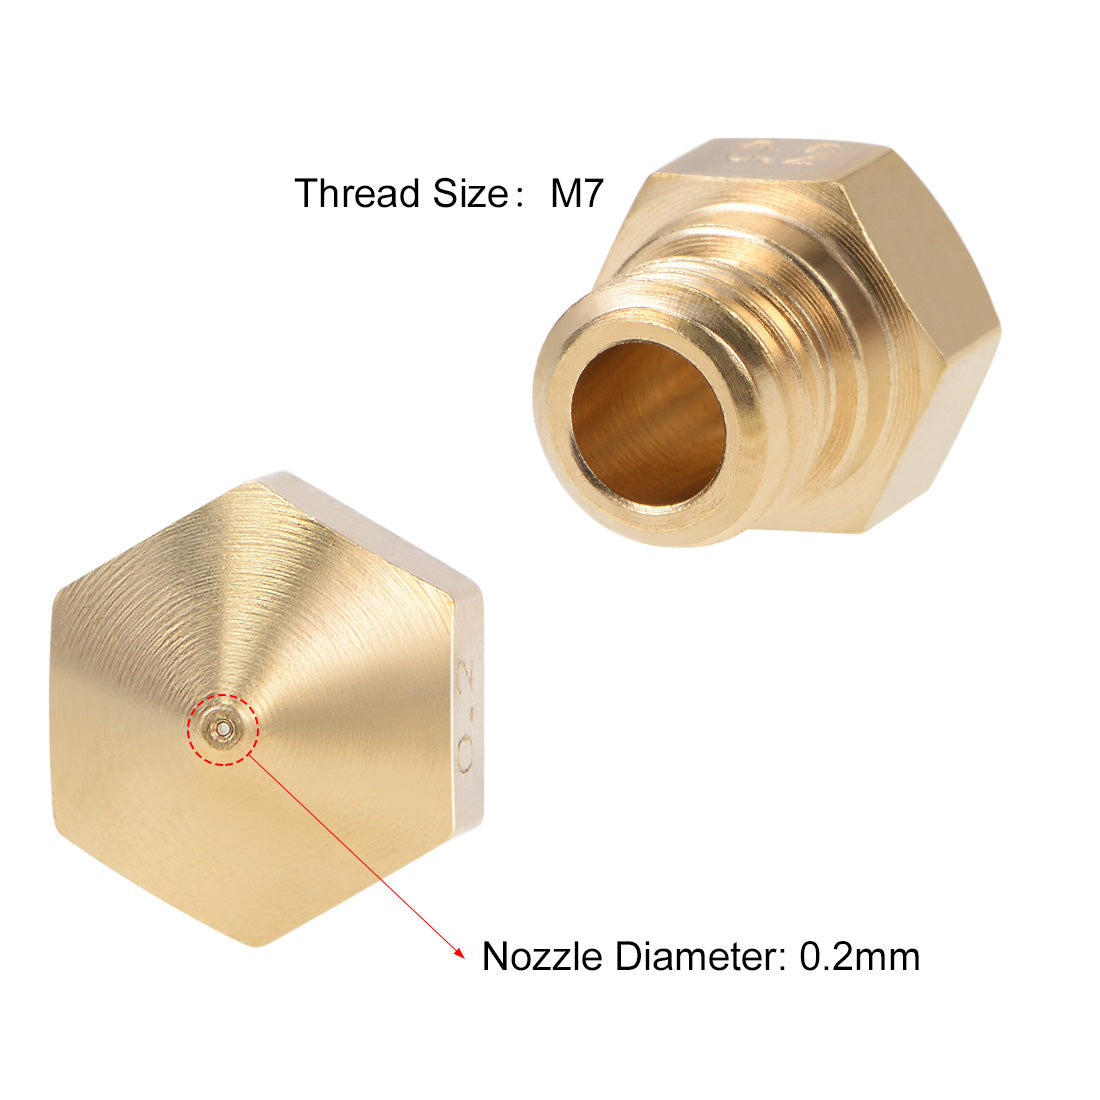 uxcell Uxcell 0.2mm 3D Printer Nozzle Head M7 Thread Replacement for MK10 1.75mm Extruder Print, Brass 10pcs